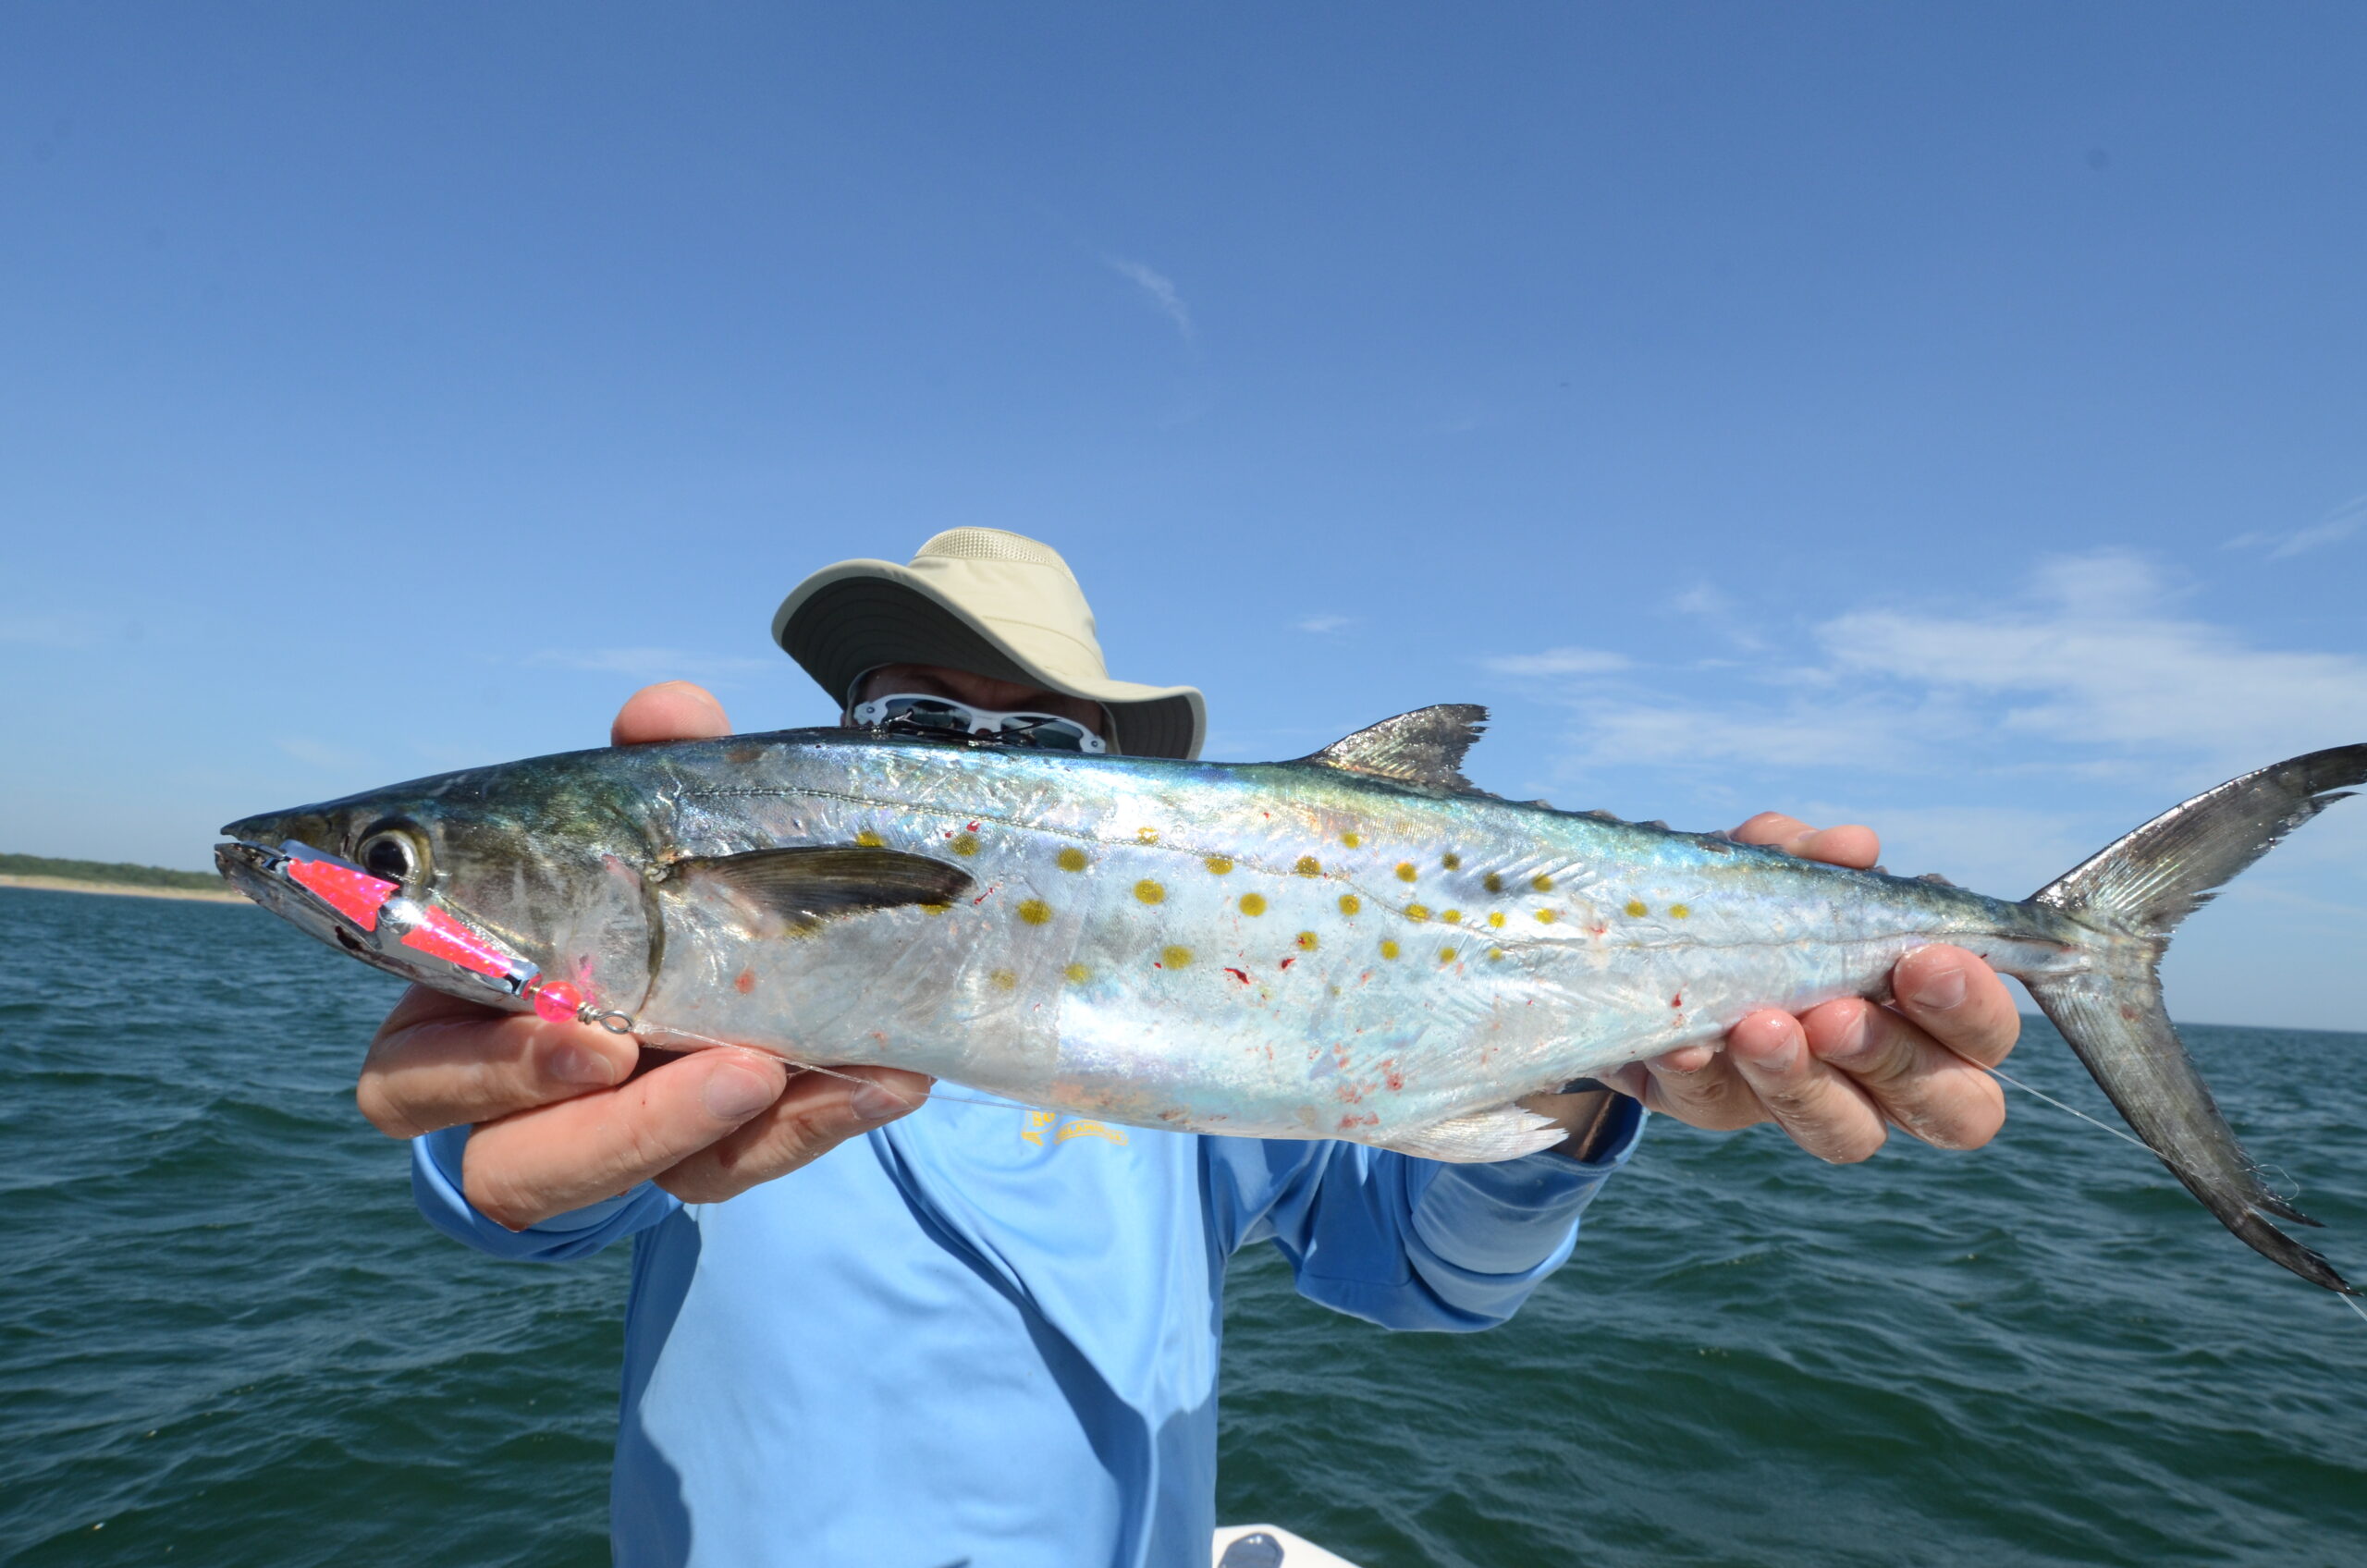 The best lures for Spanish mackerel are shiny and tough.